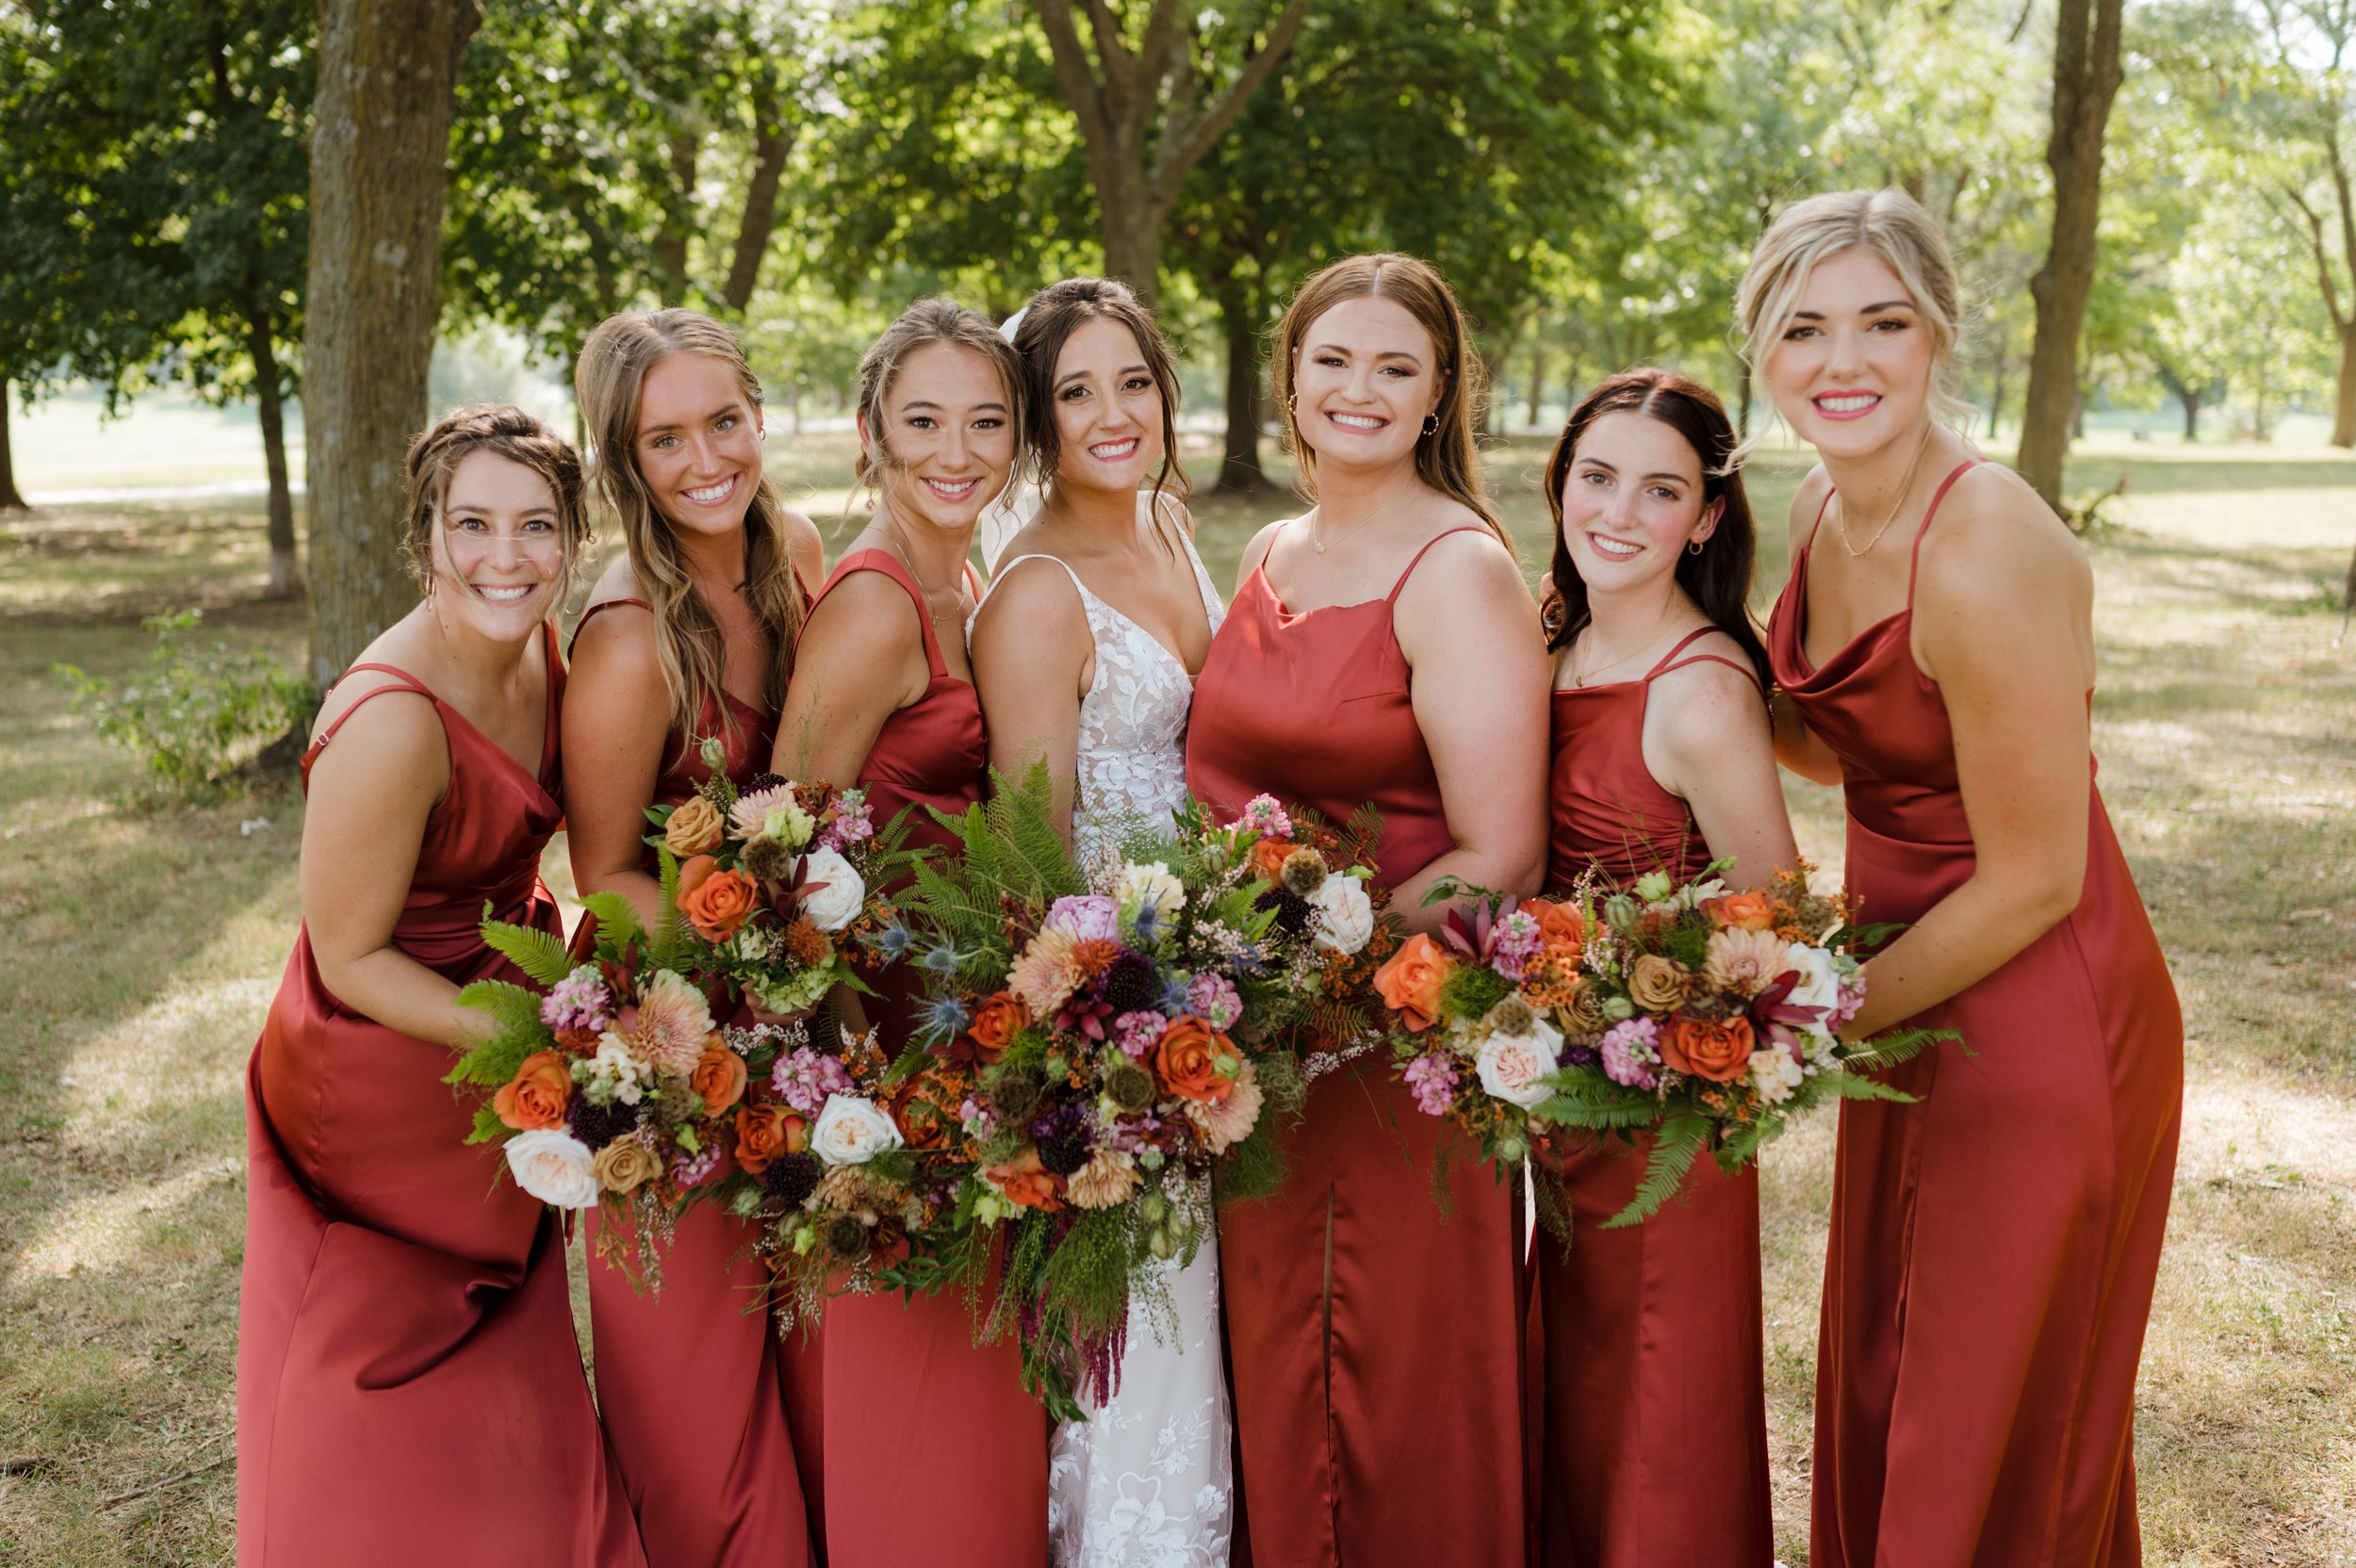  Taylor Atkinson Photography captured Cera’s and Dylan’s Fall wedding at the Omaha Palazzo perfectly! So many candid shots of their love, joy, and comradeship between their family and friends, along with the beautiful floral and natural ambiance of t